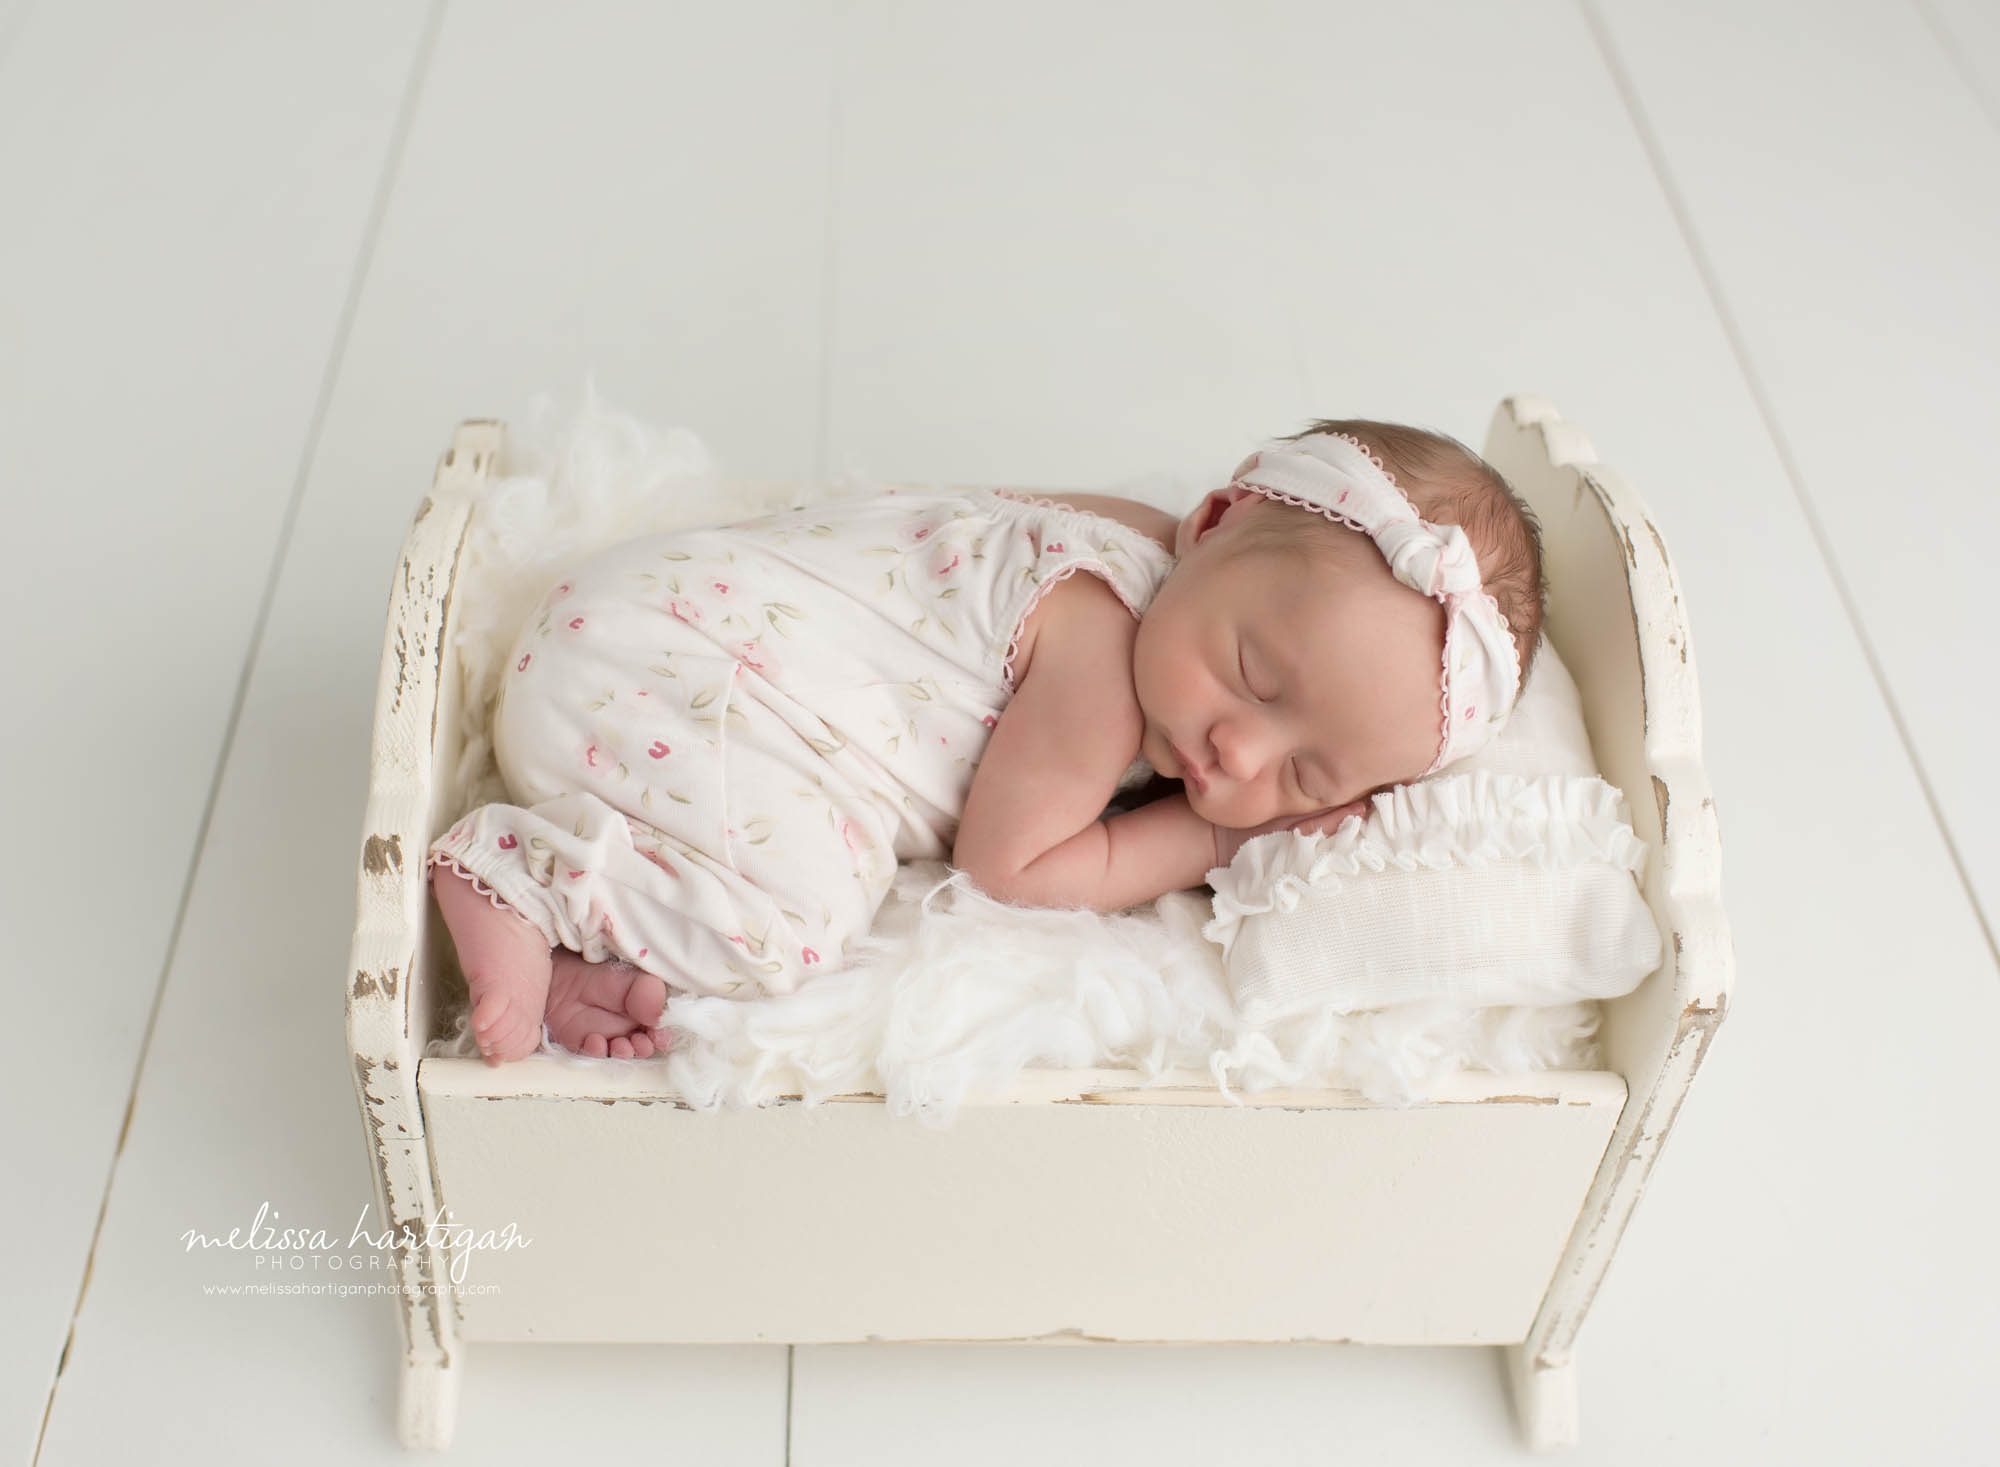 Baby girl posed in cradle prop wearing floral newborn outfit and headband CT baby photography